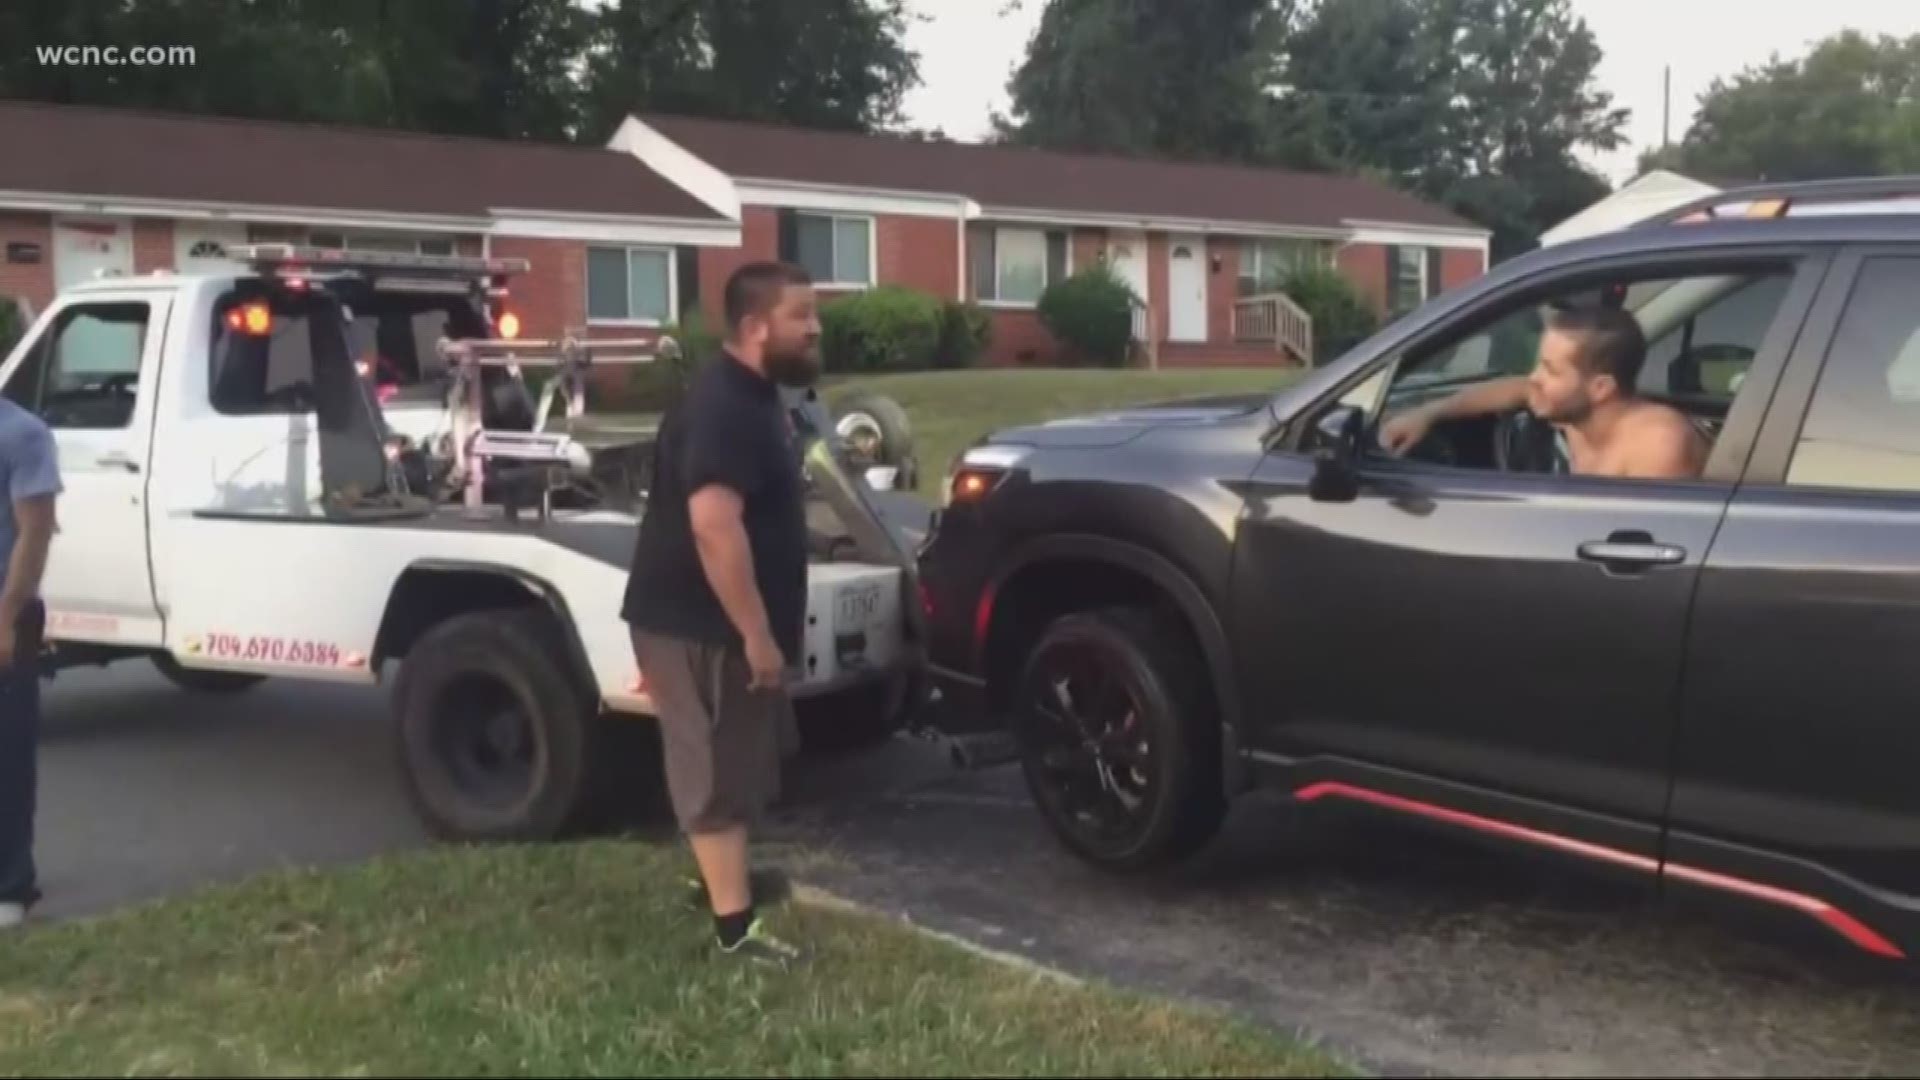 You might remember a video from a few months ago showing tow truck driver Joshua Fischer in a yelling match with a man.